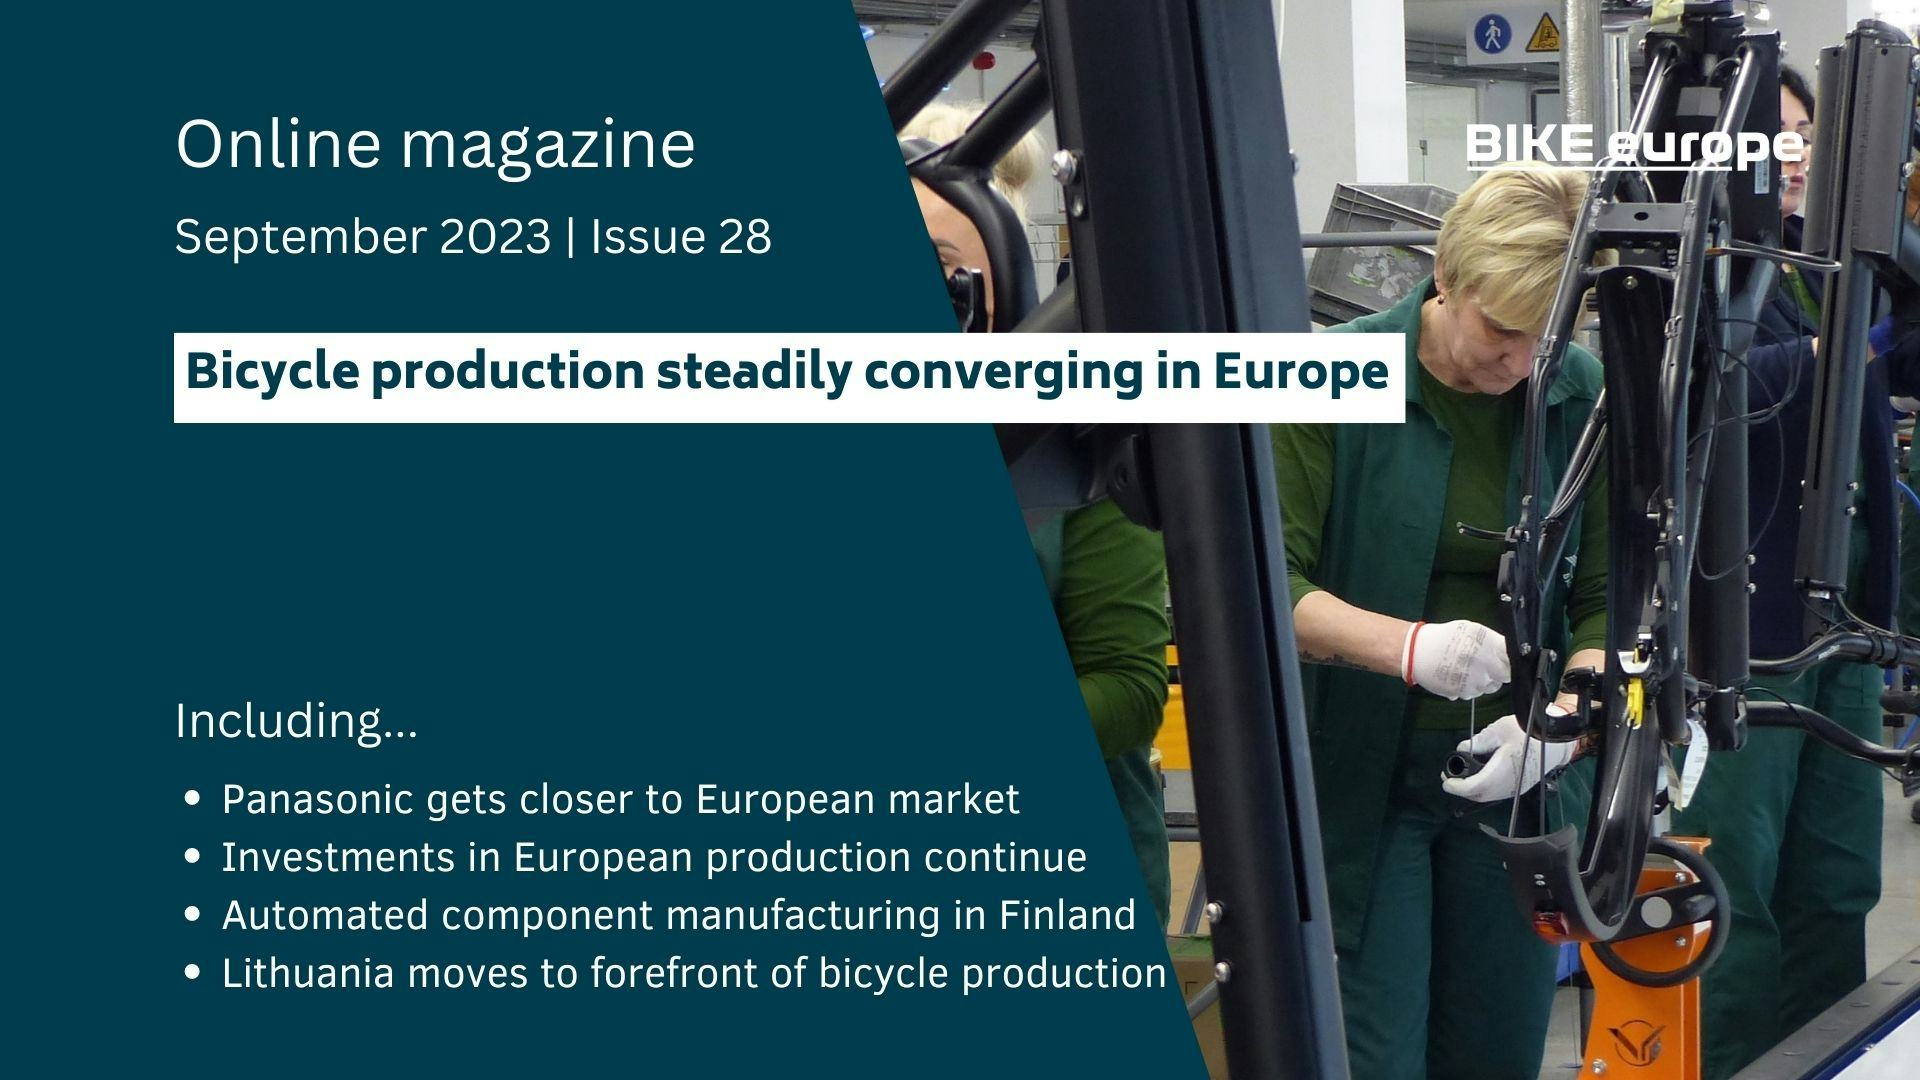 Bicycle production steadily converging in Europe